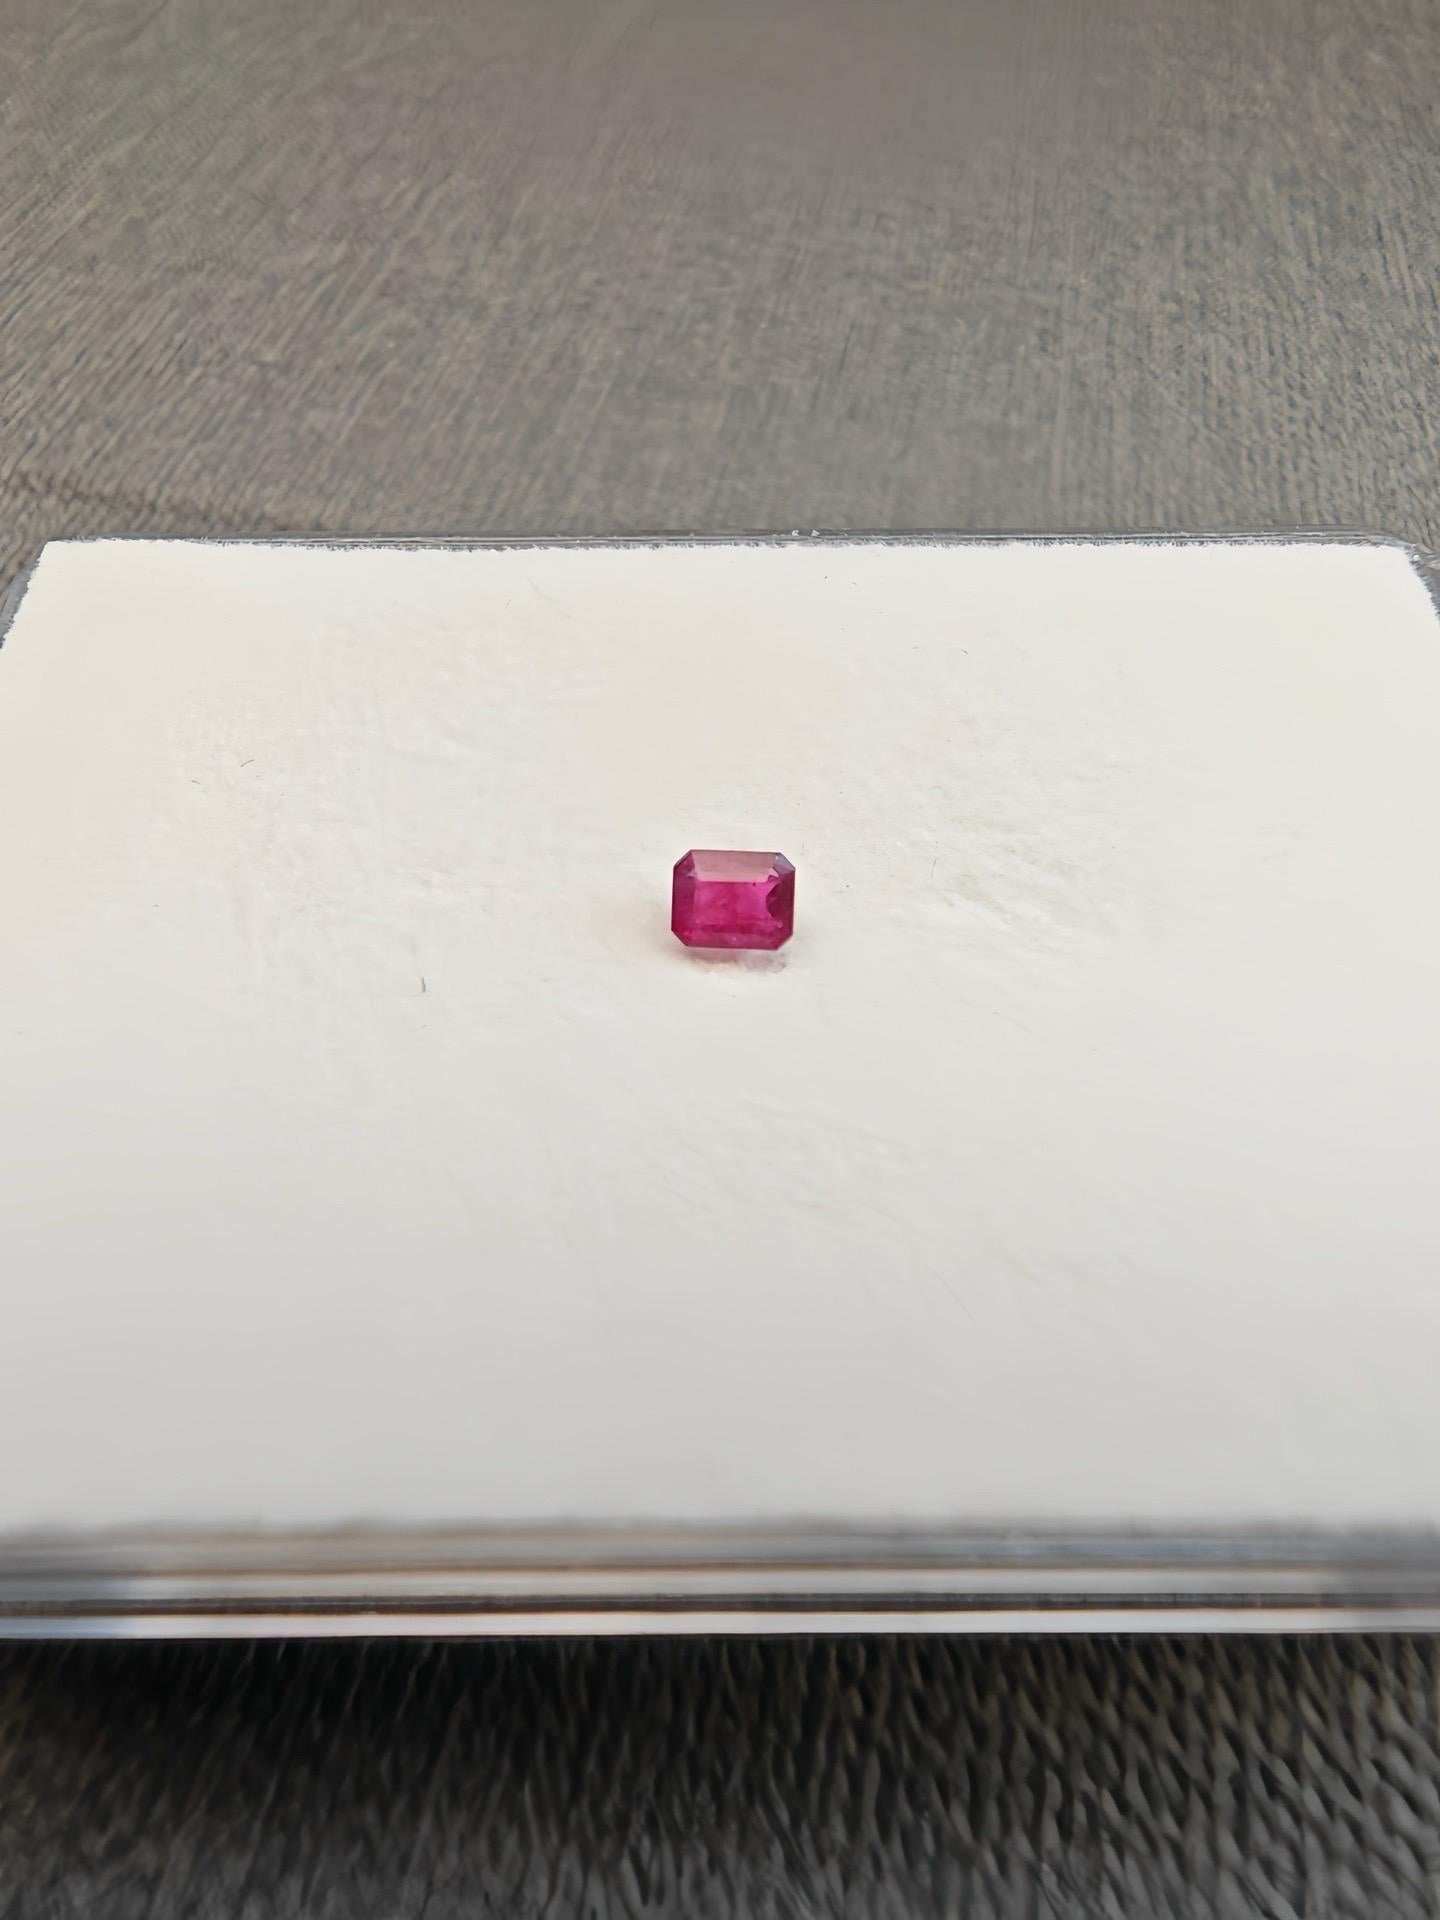 Emerald Cut Rare natural red emerald red beryl 0.16ct with certificate treasure For Sale